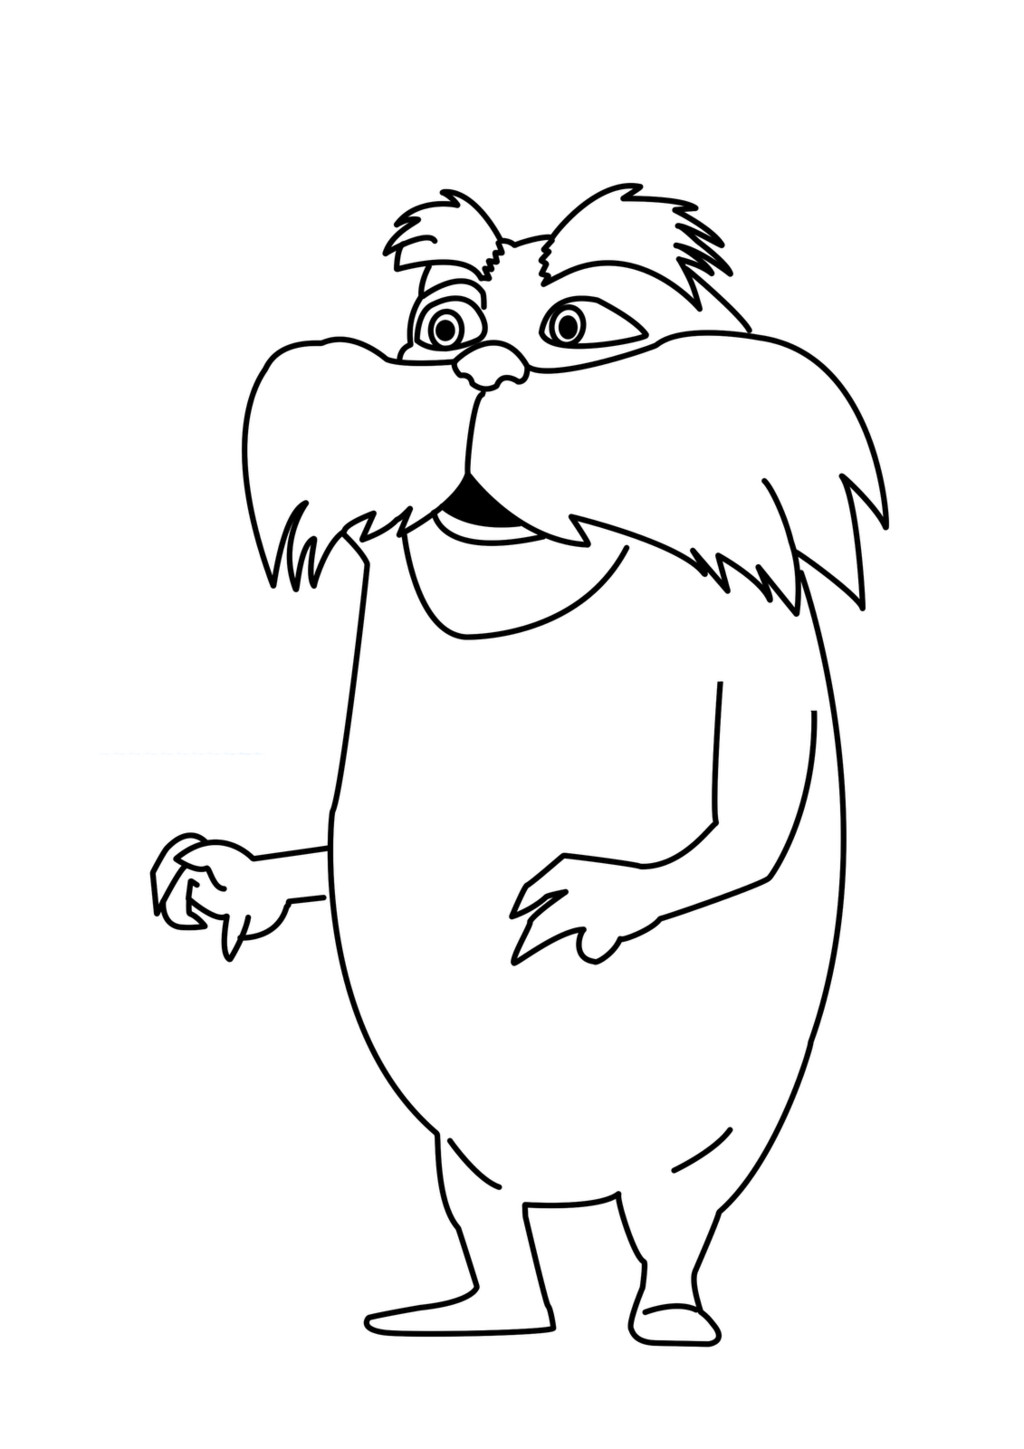 lorax coloring page free printable lorax coloring pages for kids coloring lorax page 1 2